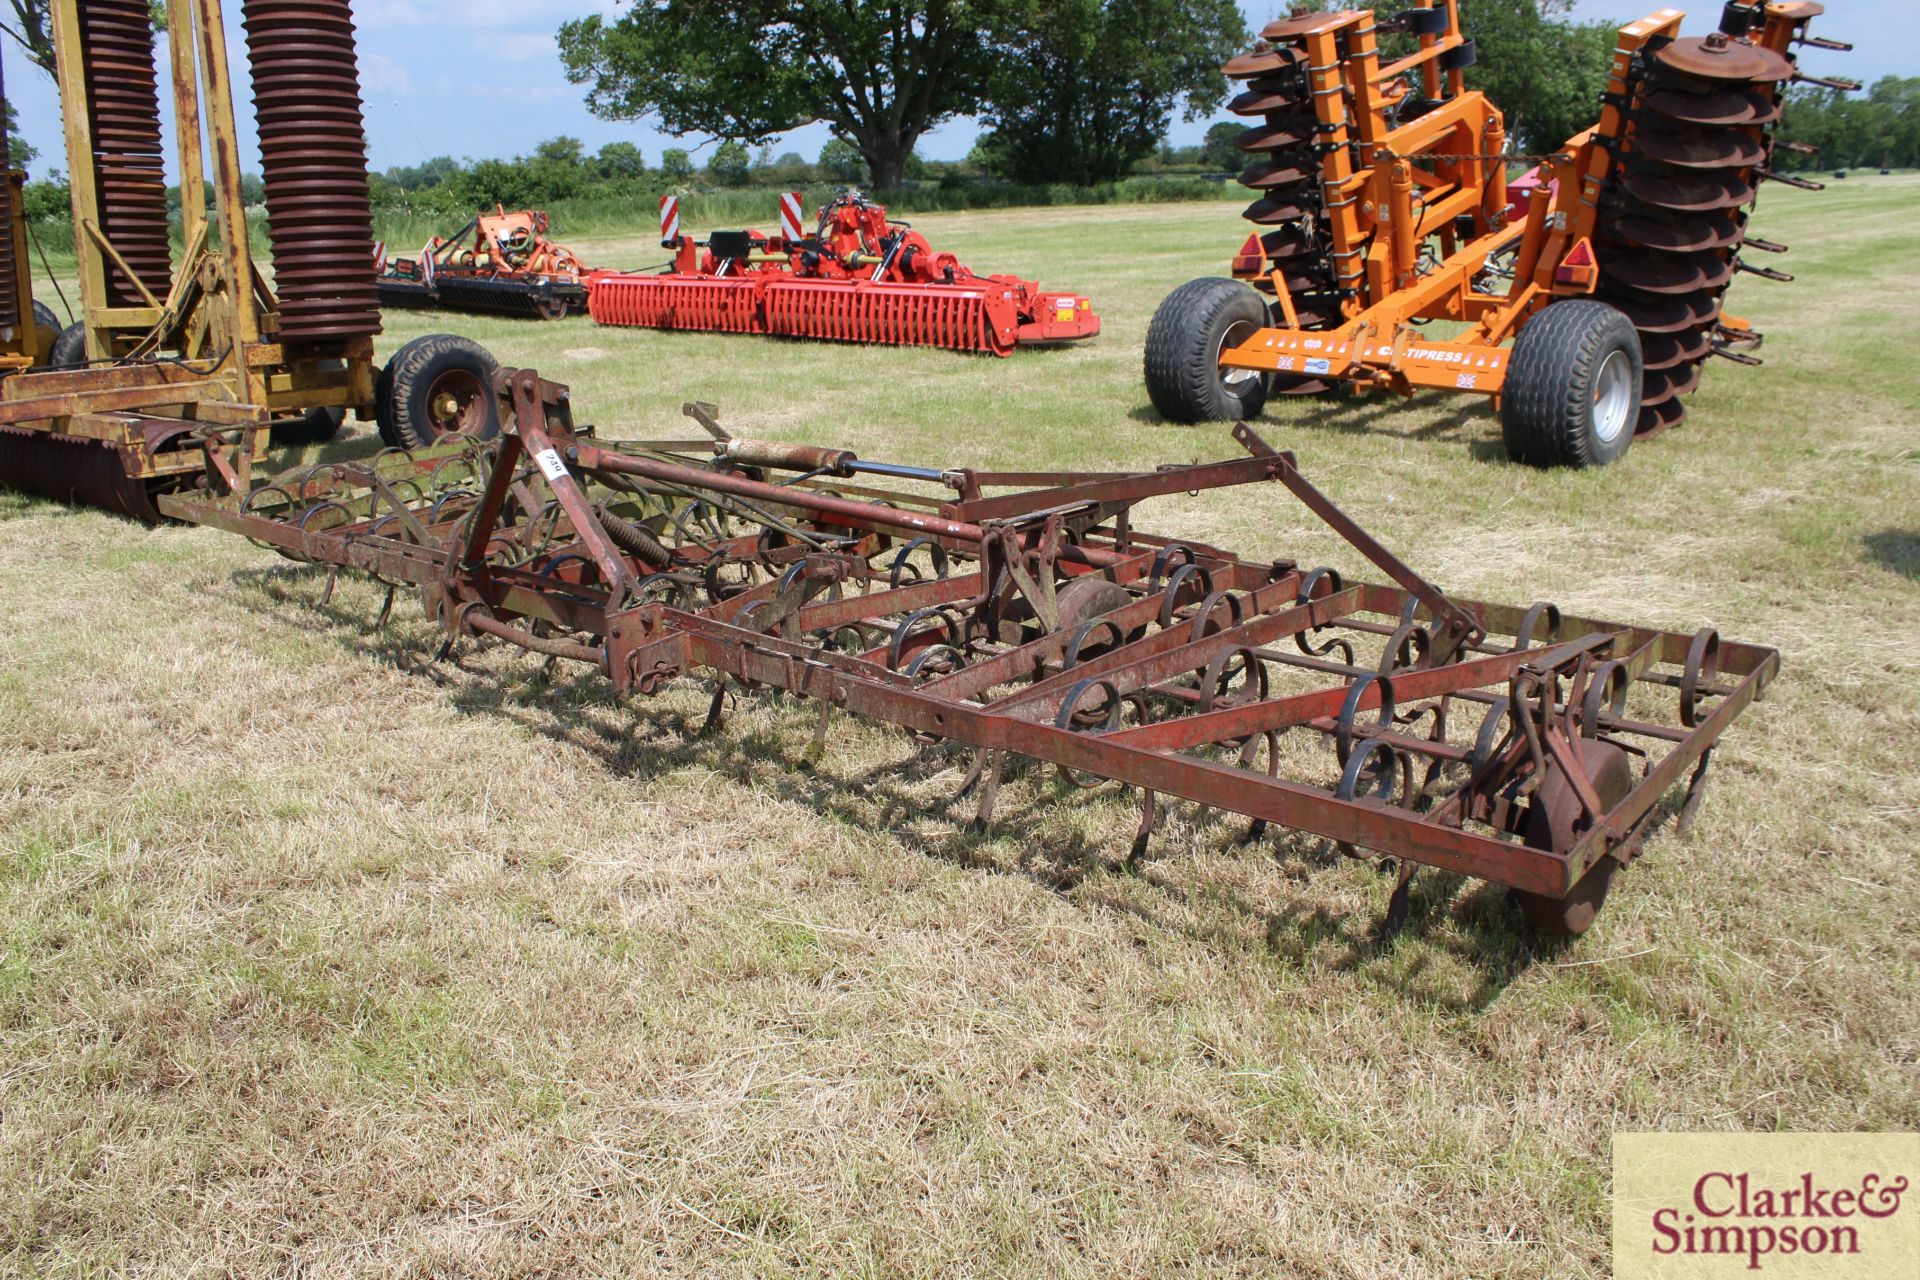 **CATALOGUE CHANGE** Kongsklide 18ft Triple-K hydraulic folding mounted spring tines. With depth